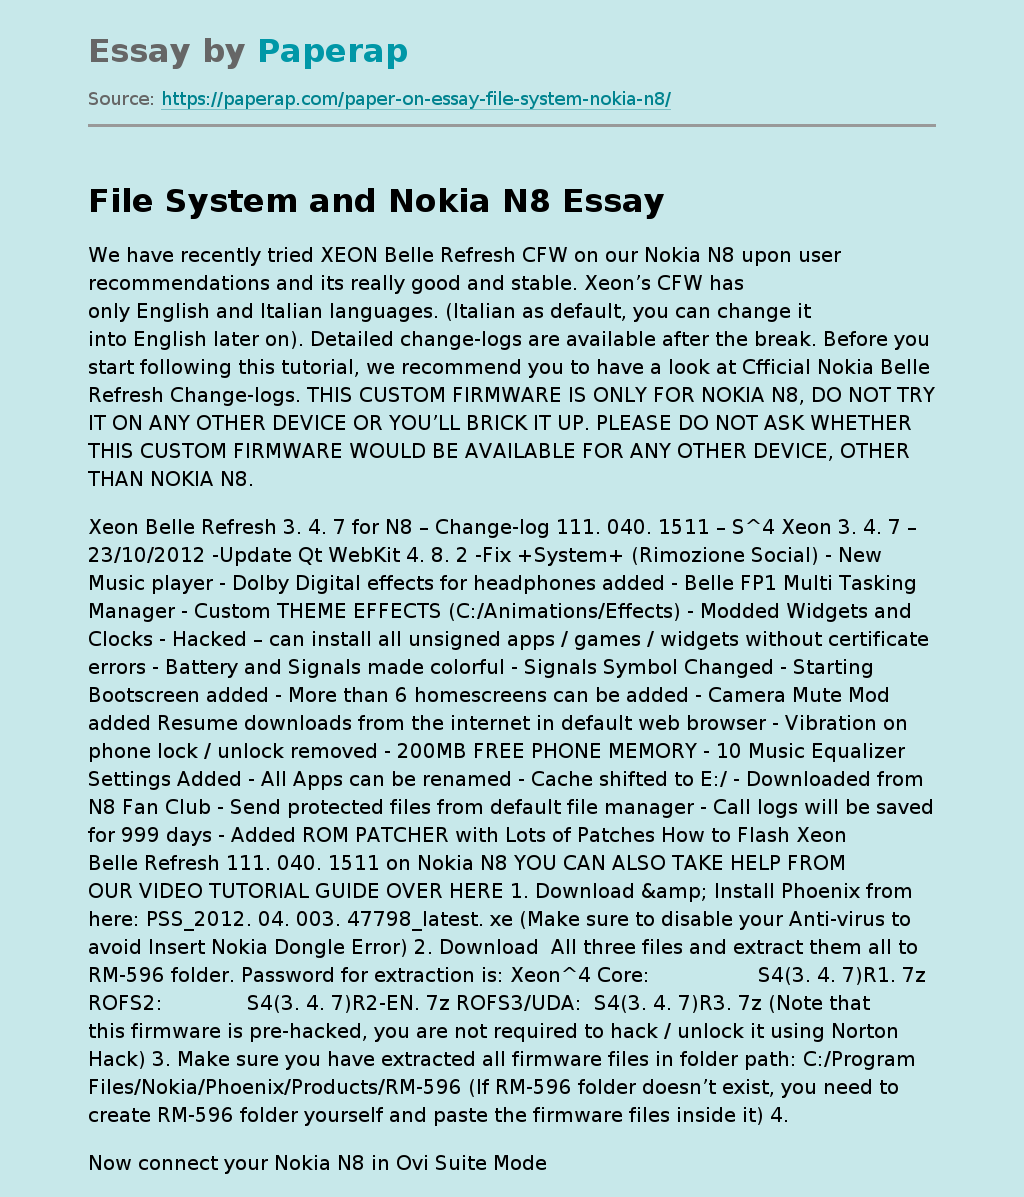 File System and Nokia N8